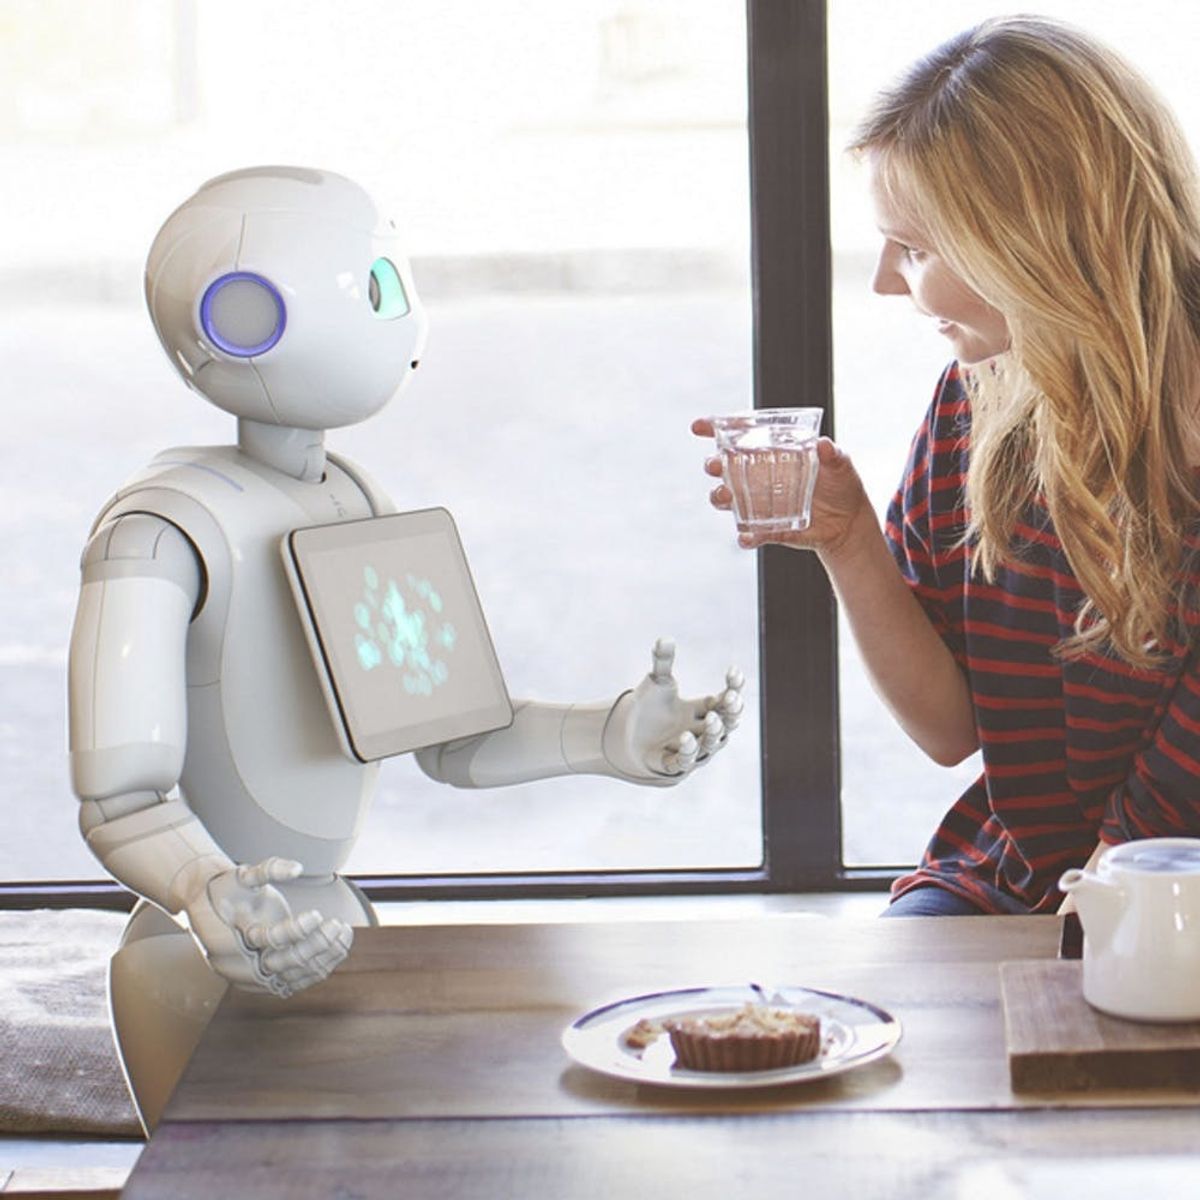 Why Your New BFF Might Be This Robot